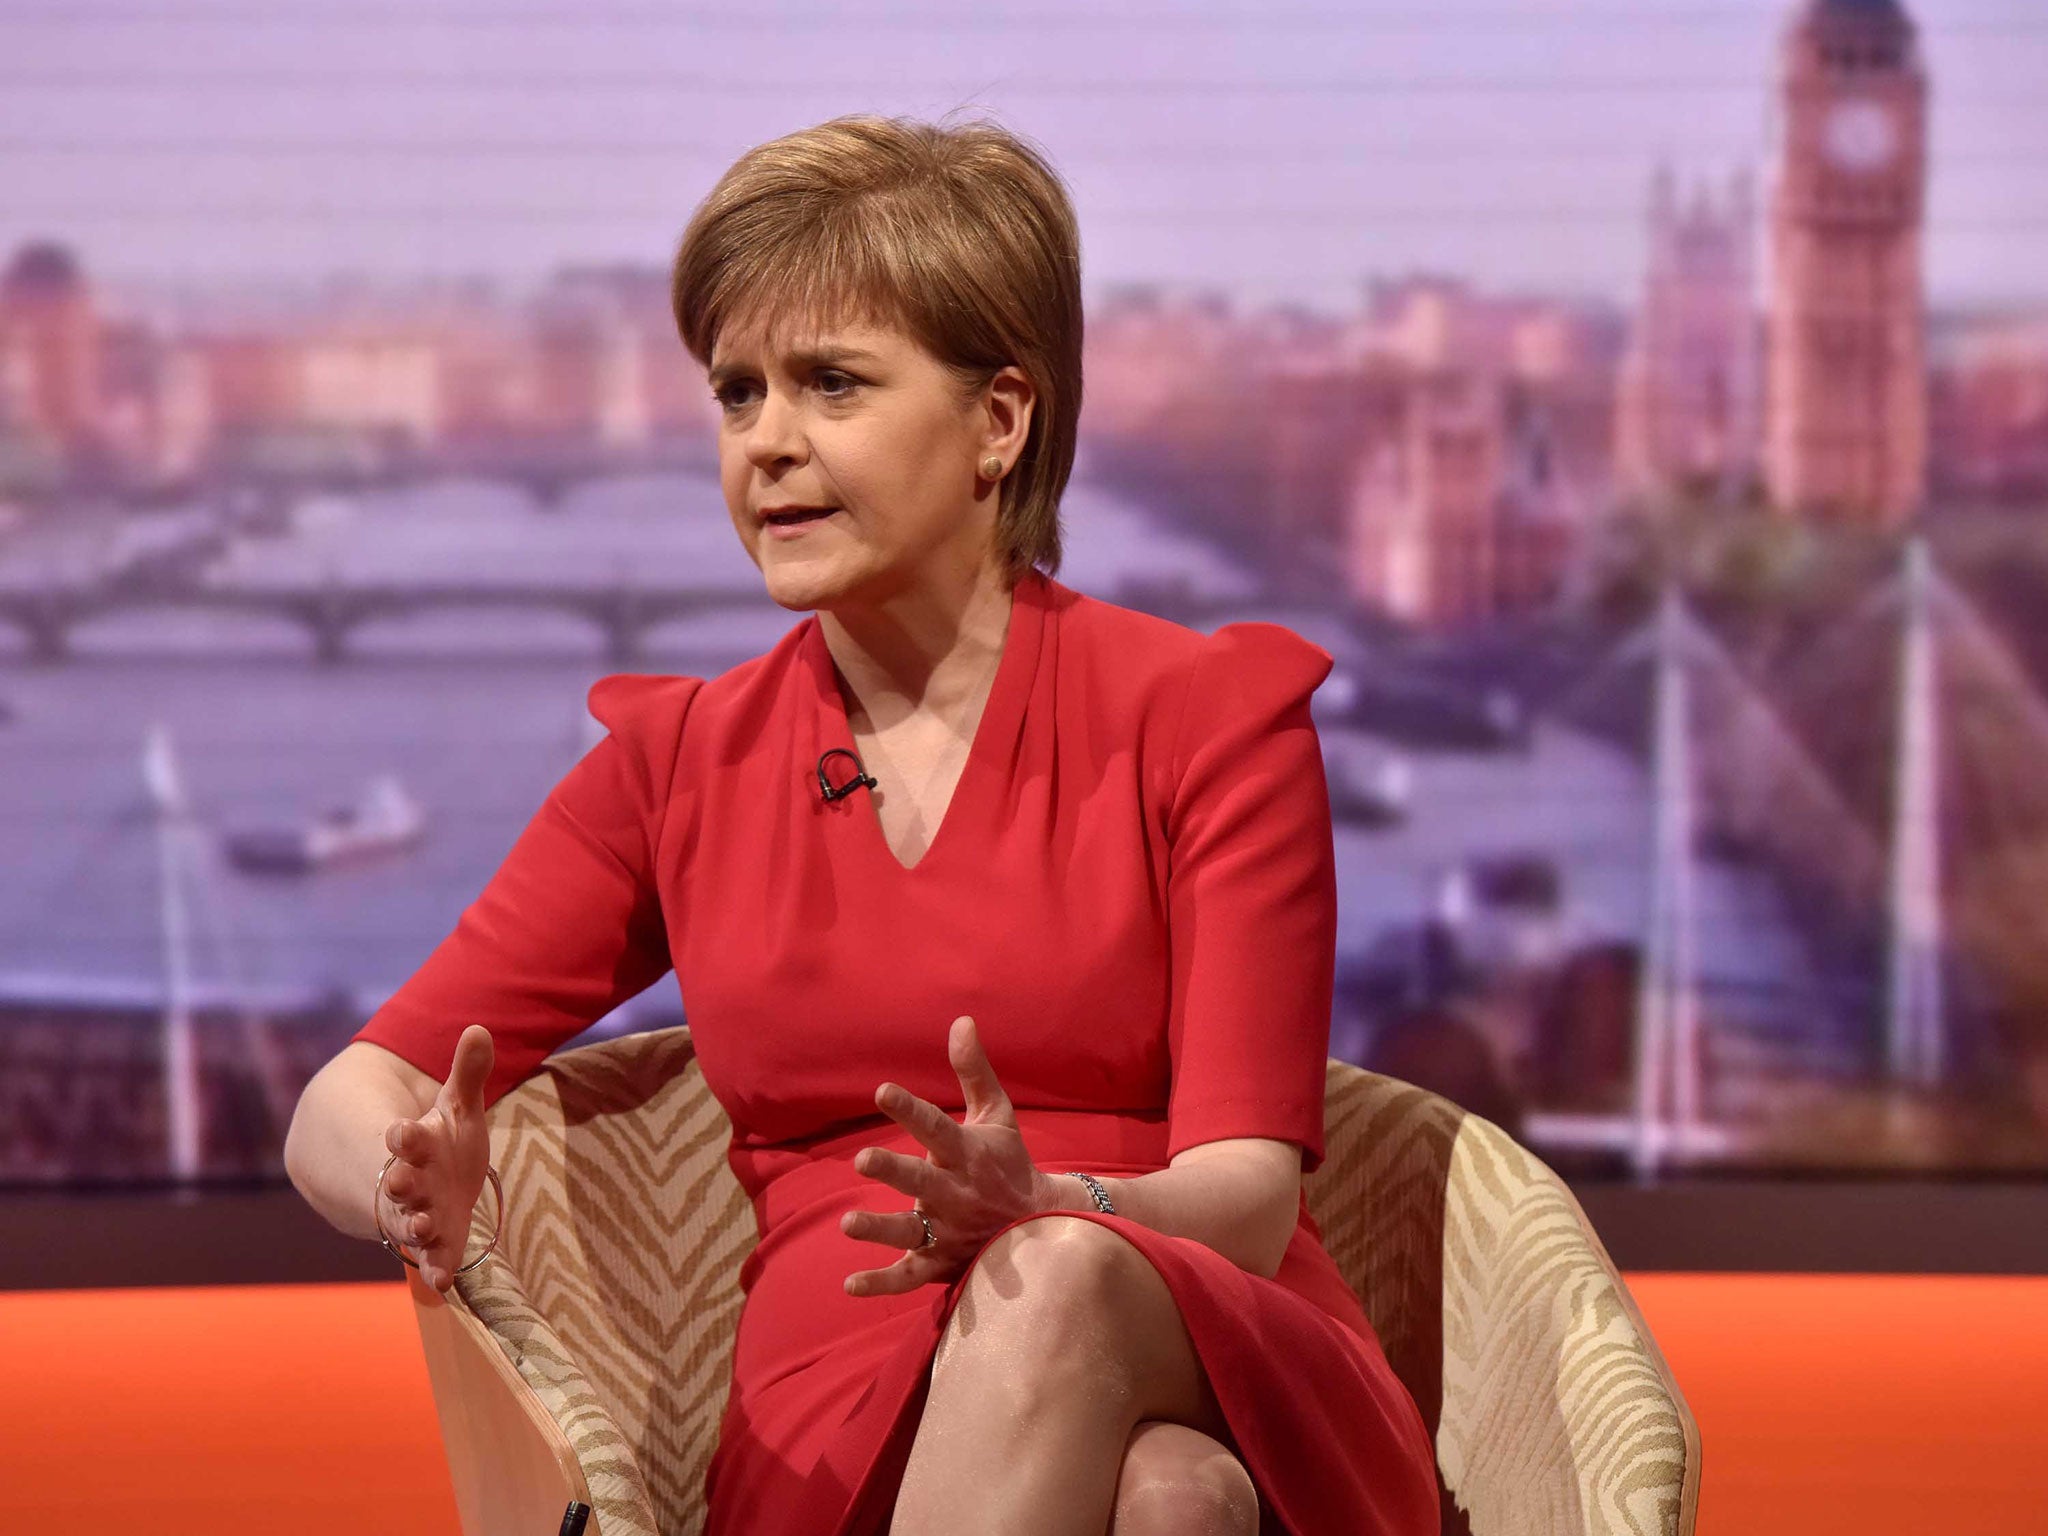 Nicola Sturgeon on ‘The Andrew Marr Show’. She has promised voters in the rest of the UK that “your views do matter to me”